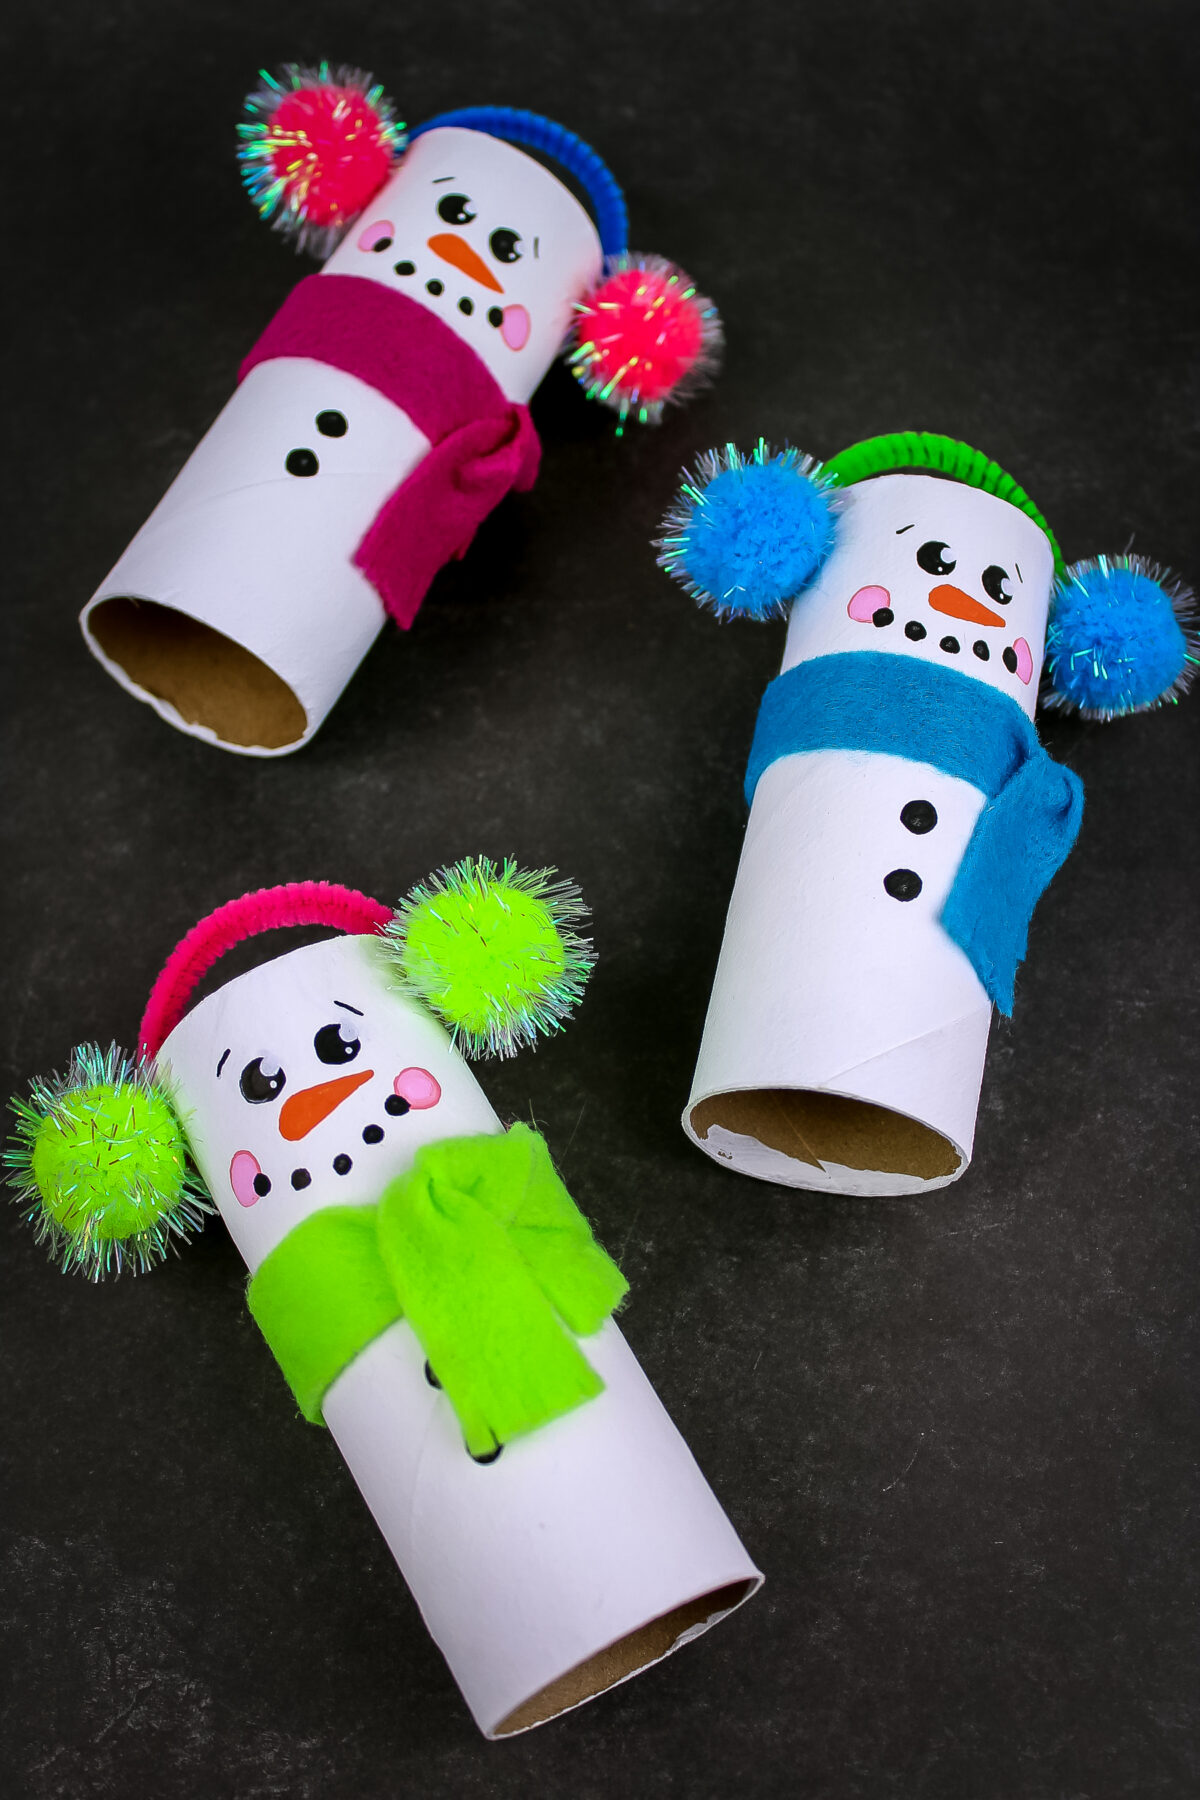 Recycled Toilet White Paper Roll Crafts Cute Snowman handmade 